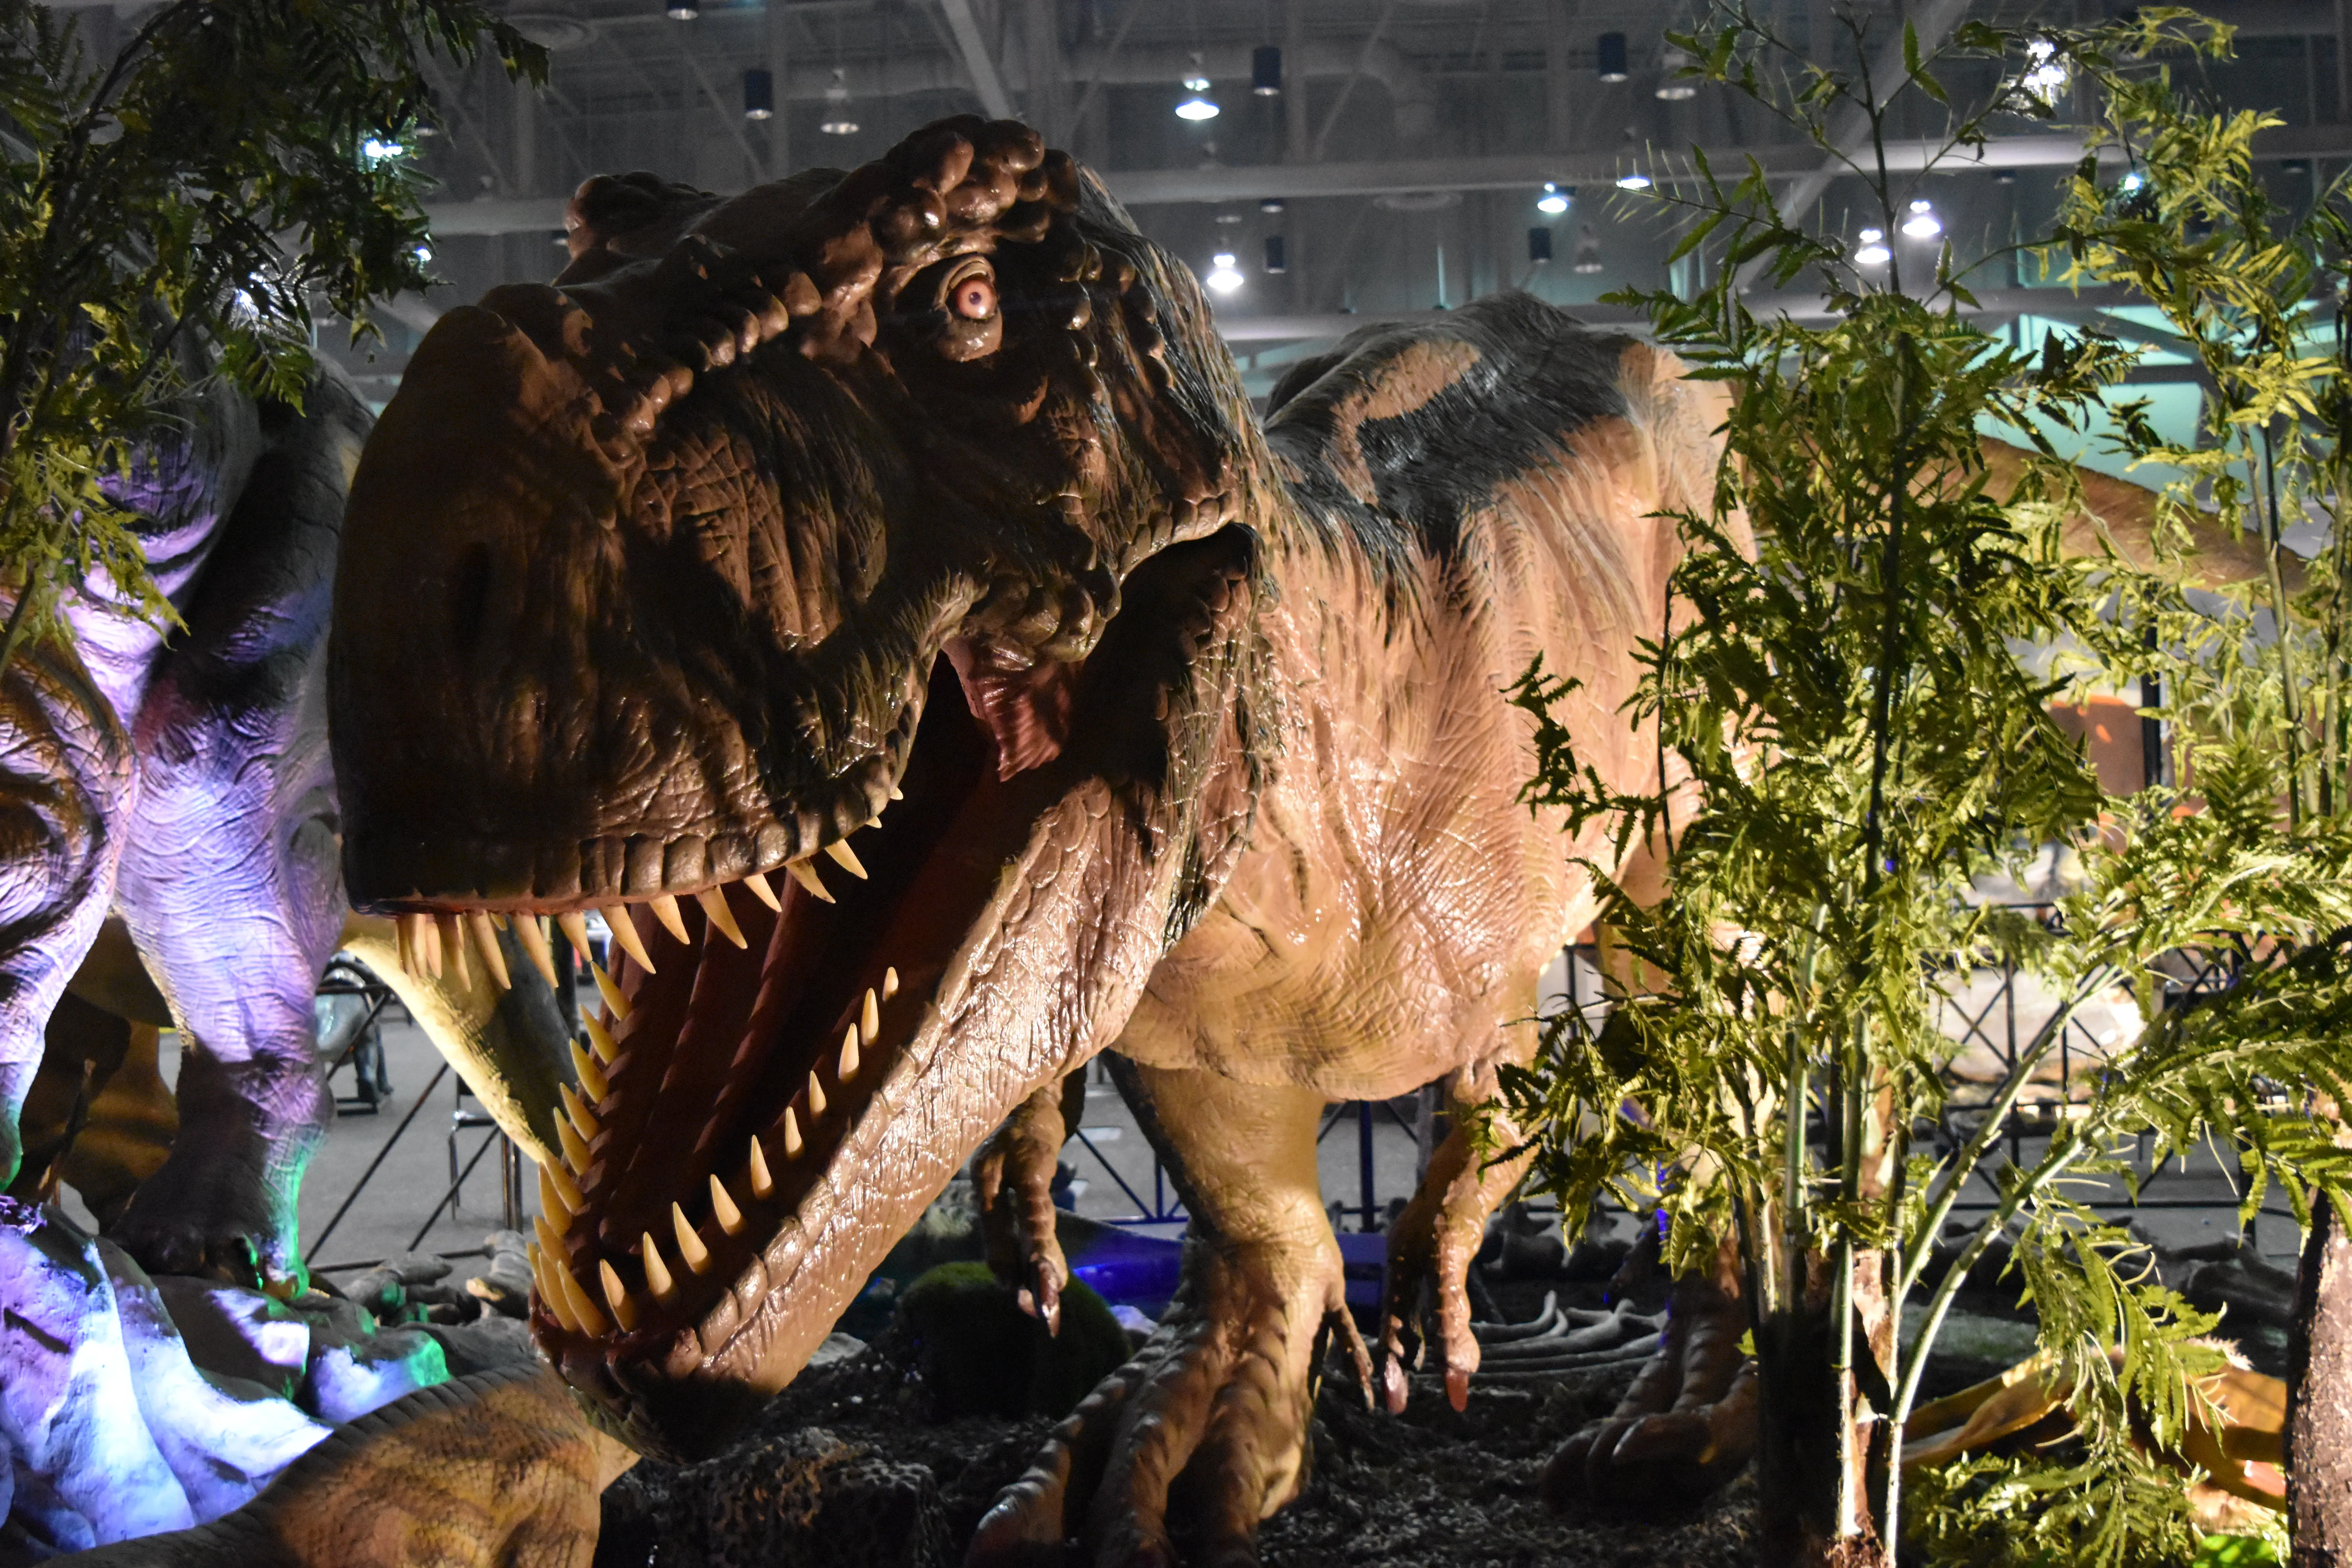 9-facts-about-jurassic-quest-dinosaur-exhibition